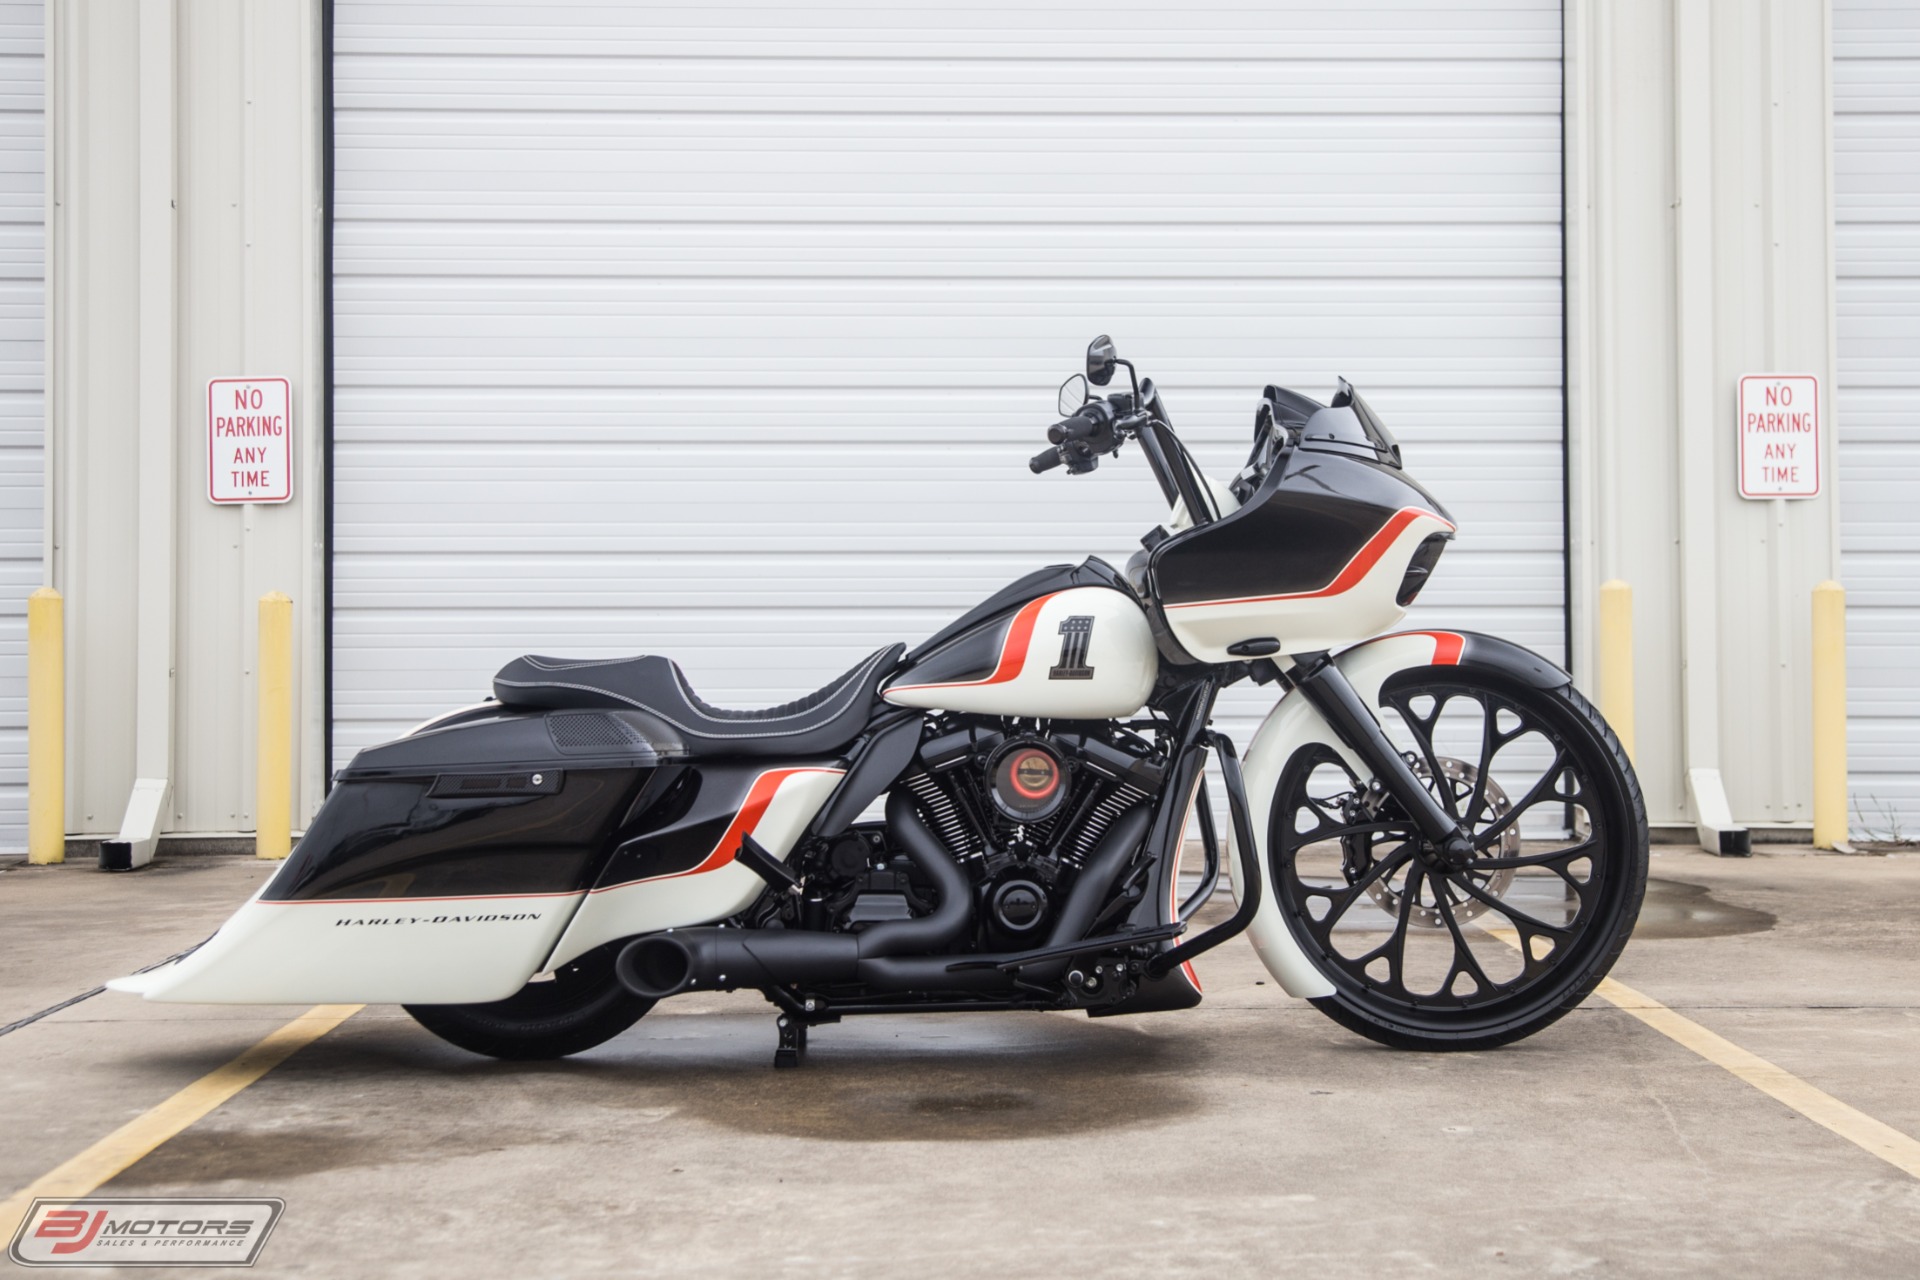 used harley road glide for sale